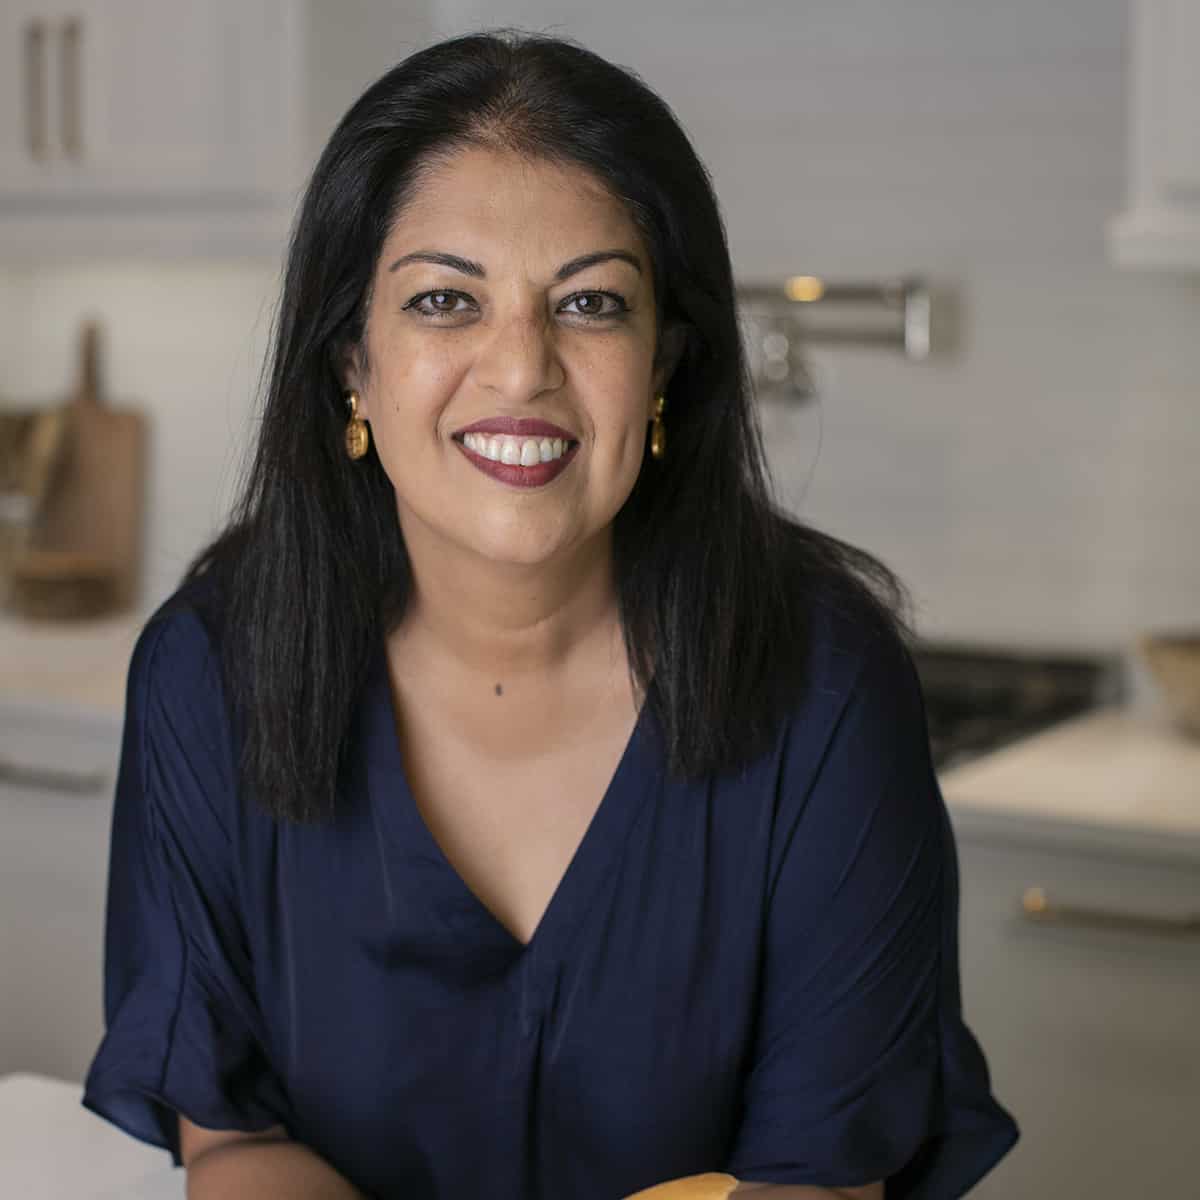 A head shot of Nosheen Babar for her story in a blue shirt leaning on a white kitchen counter.